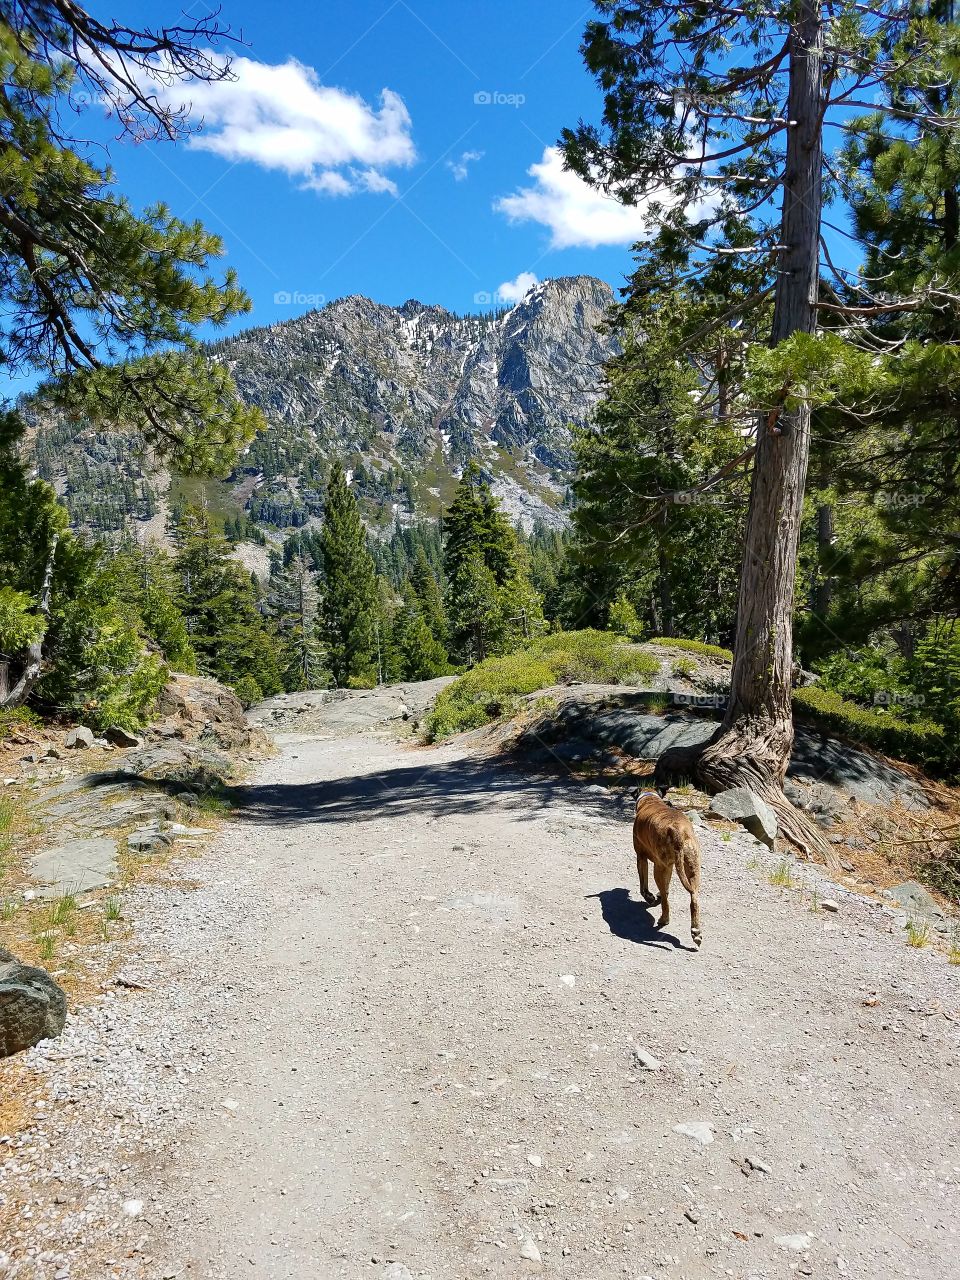 Thor and I on a walkabout in the Sierras